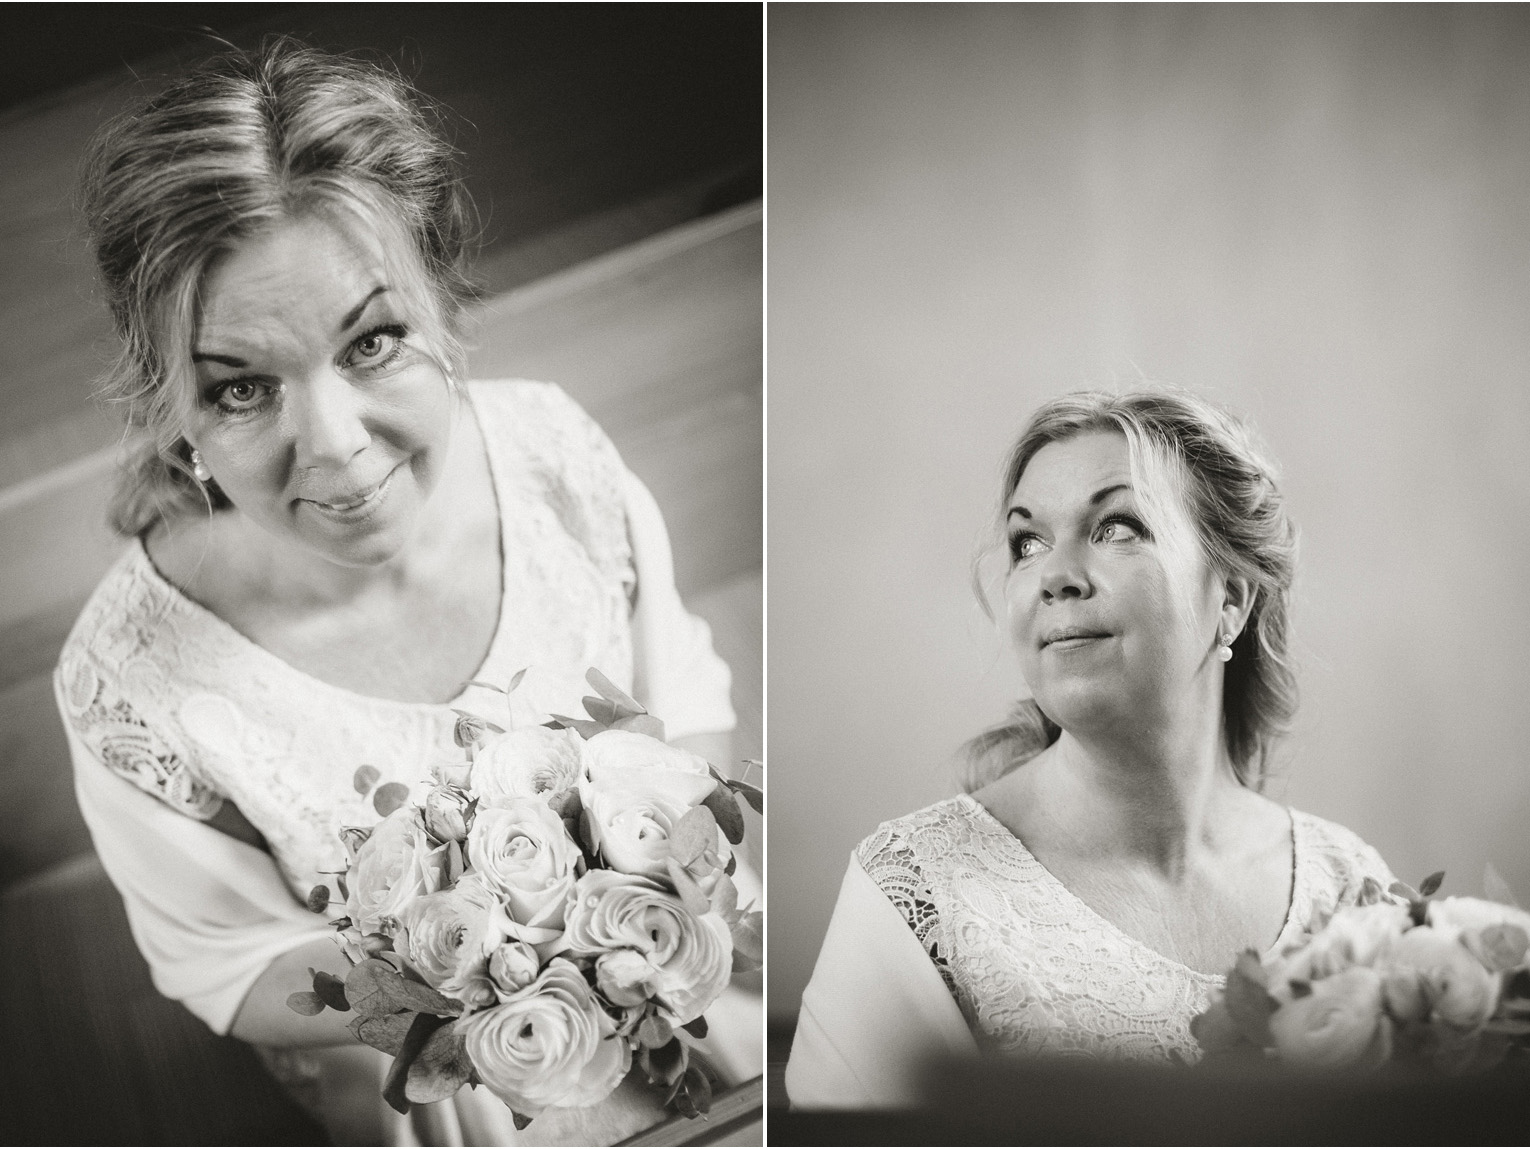 034-swedish-wedding-photography-in-black-and-white-by-johan-lindqvist-from-smaland